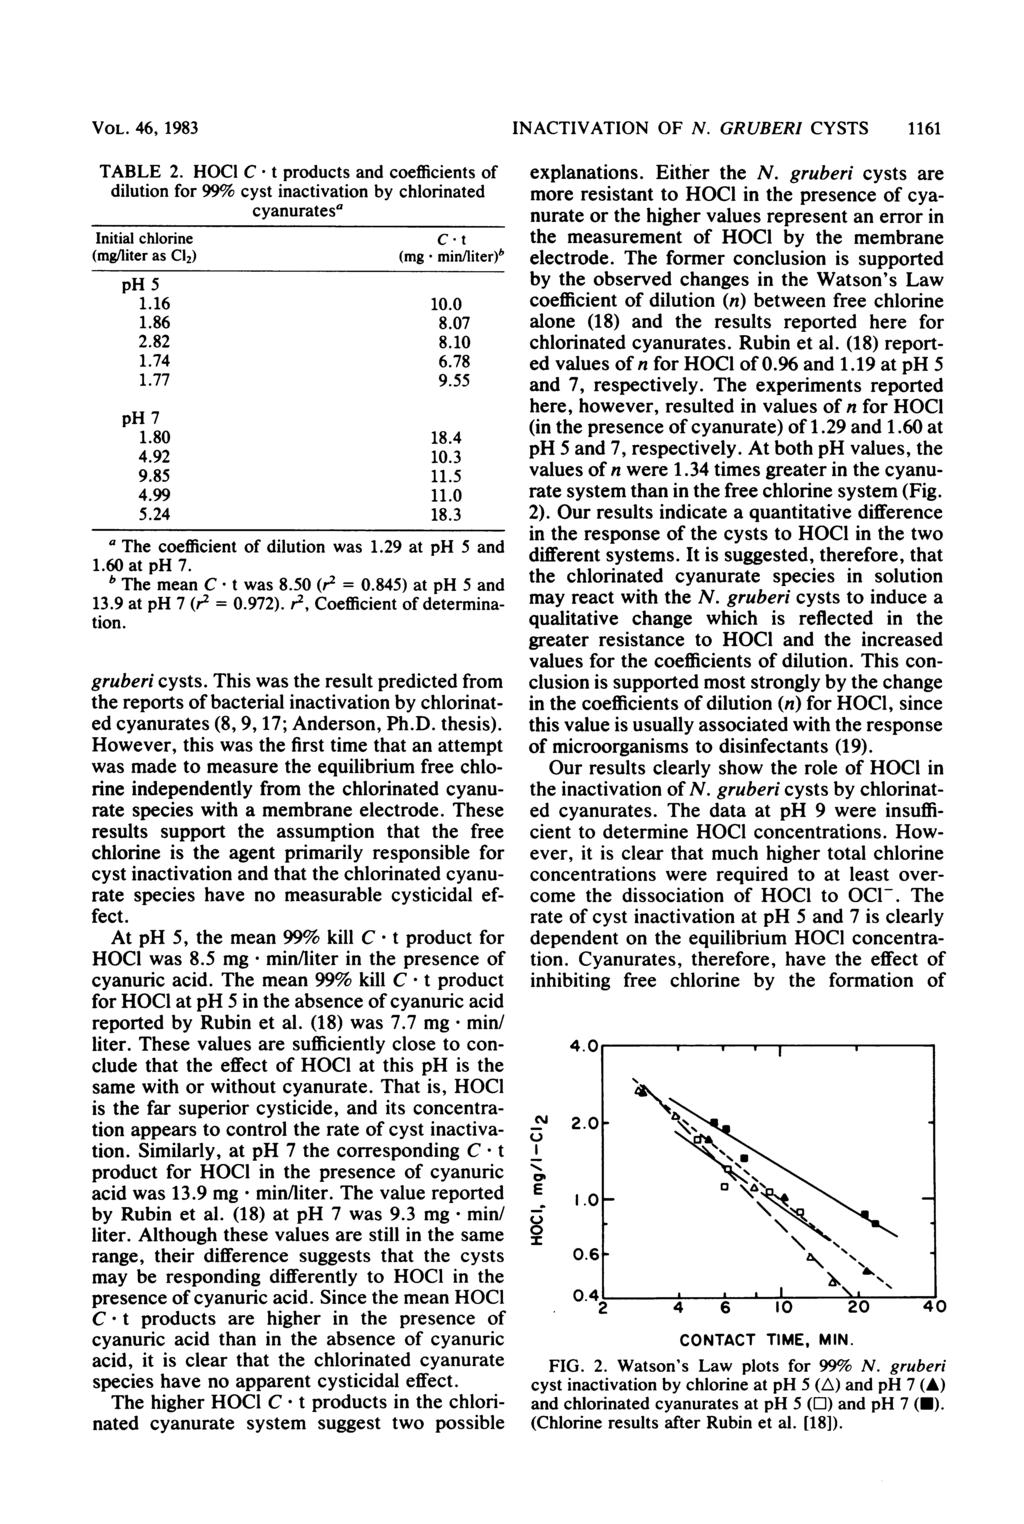 VOL. 46, 1983 TABLE 2. HOCI C t products and coefficients of dilution for 99% cyst inactivation by chlorinated cyanuratesa Initial chlorine C t (mg/liter as Cl2) (mg * min/liter)b ph 5 1.16 10.0 1.